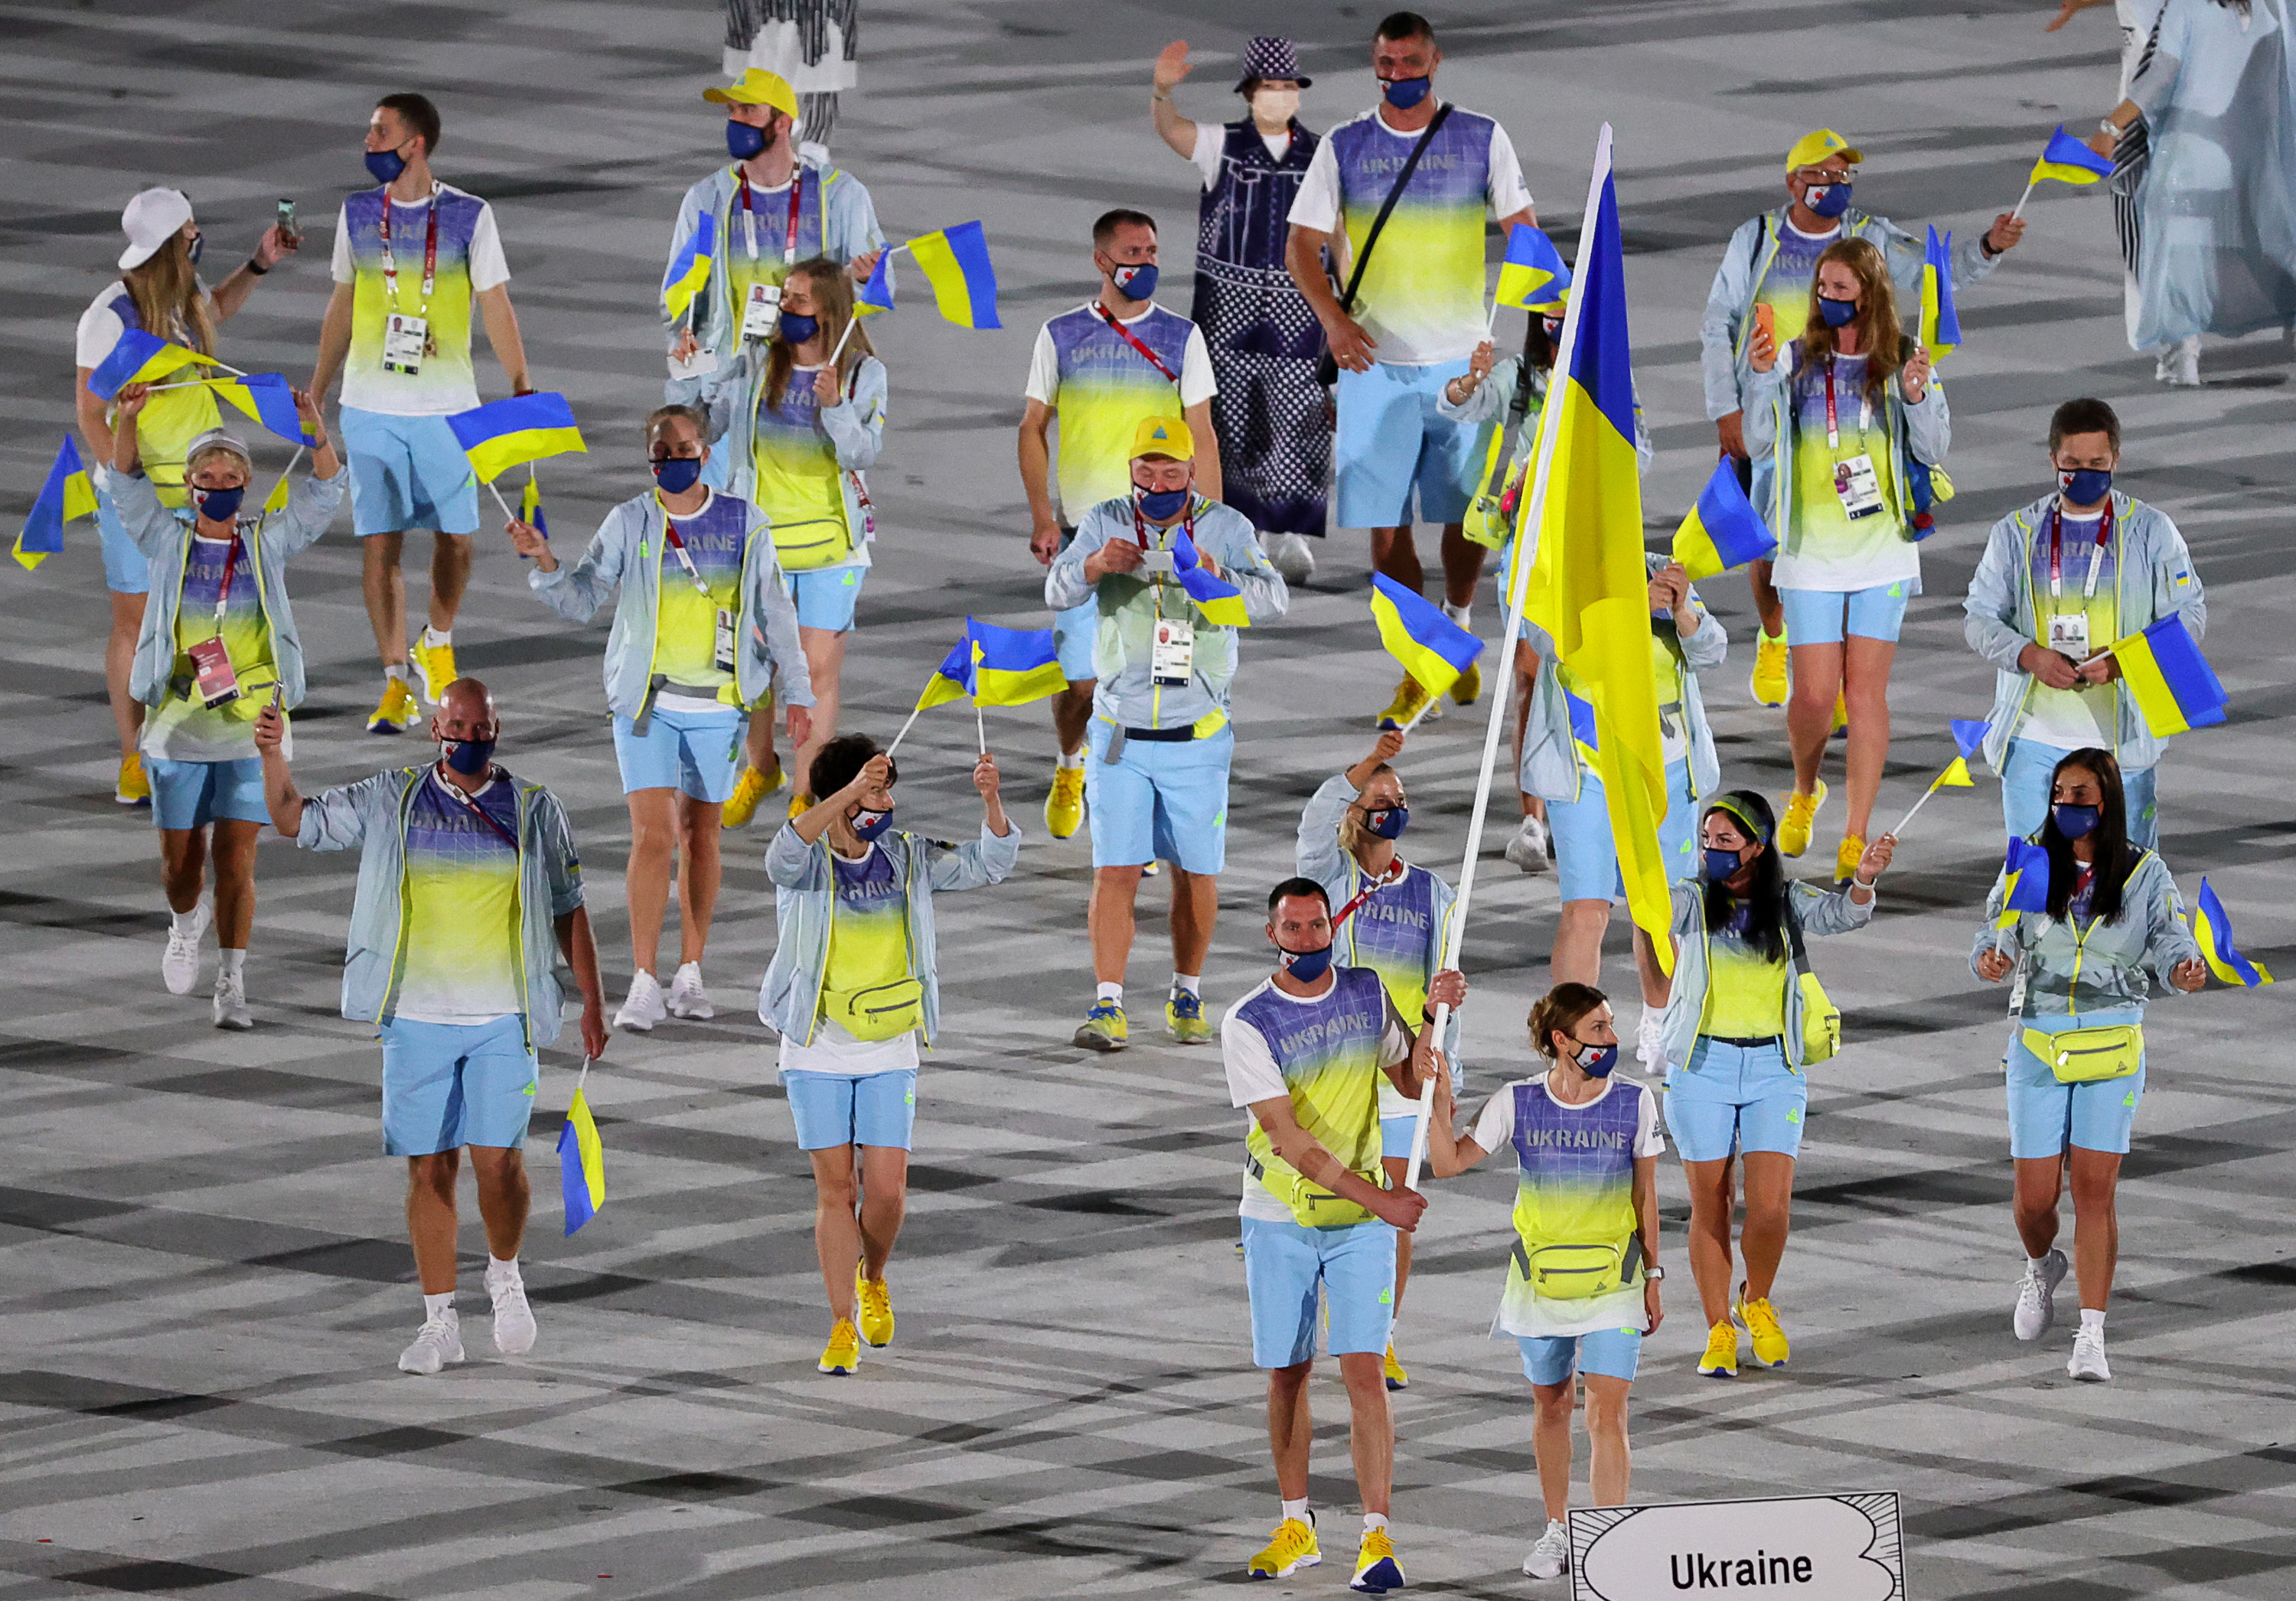 The athletes wore multicolored shirts with matching shorts that reflected the colors of their flags